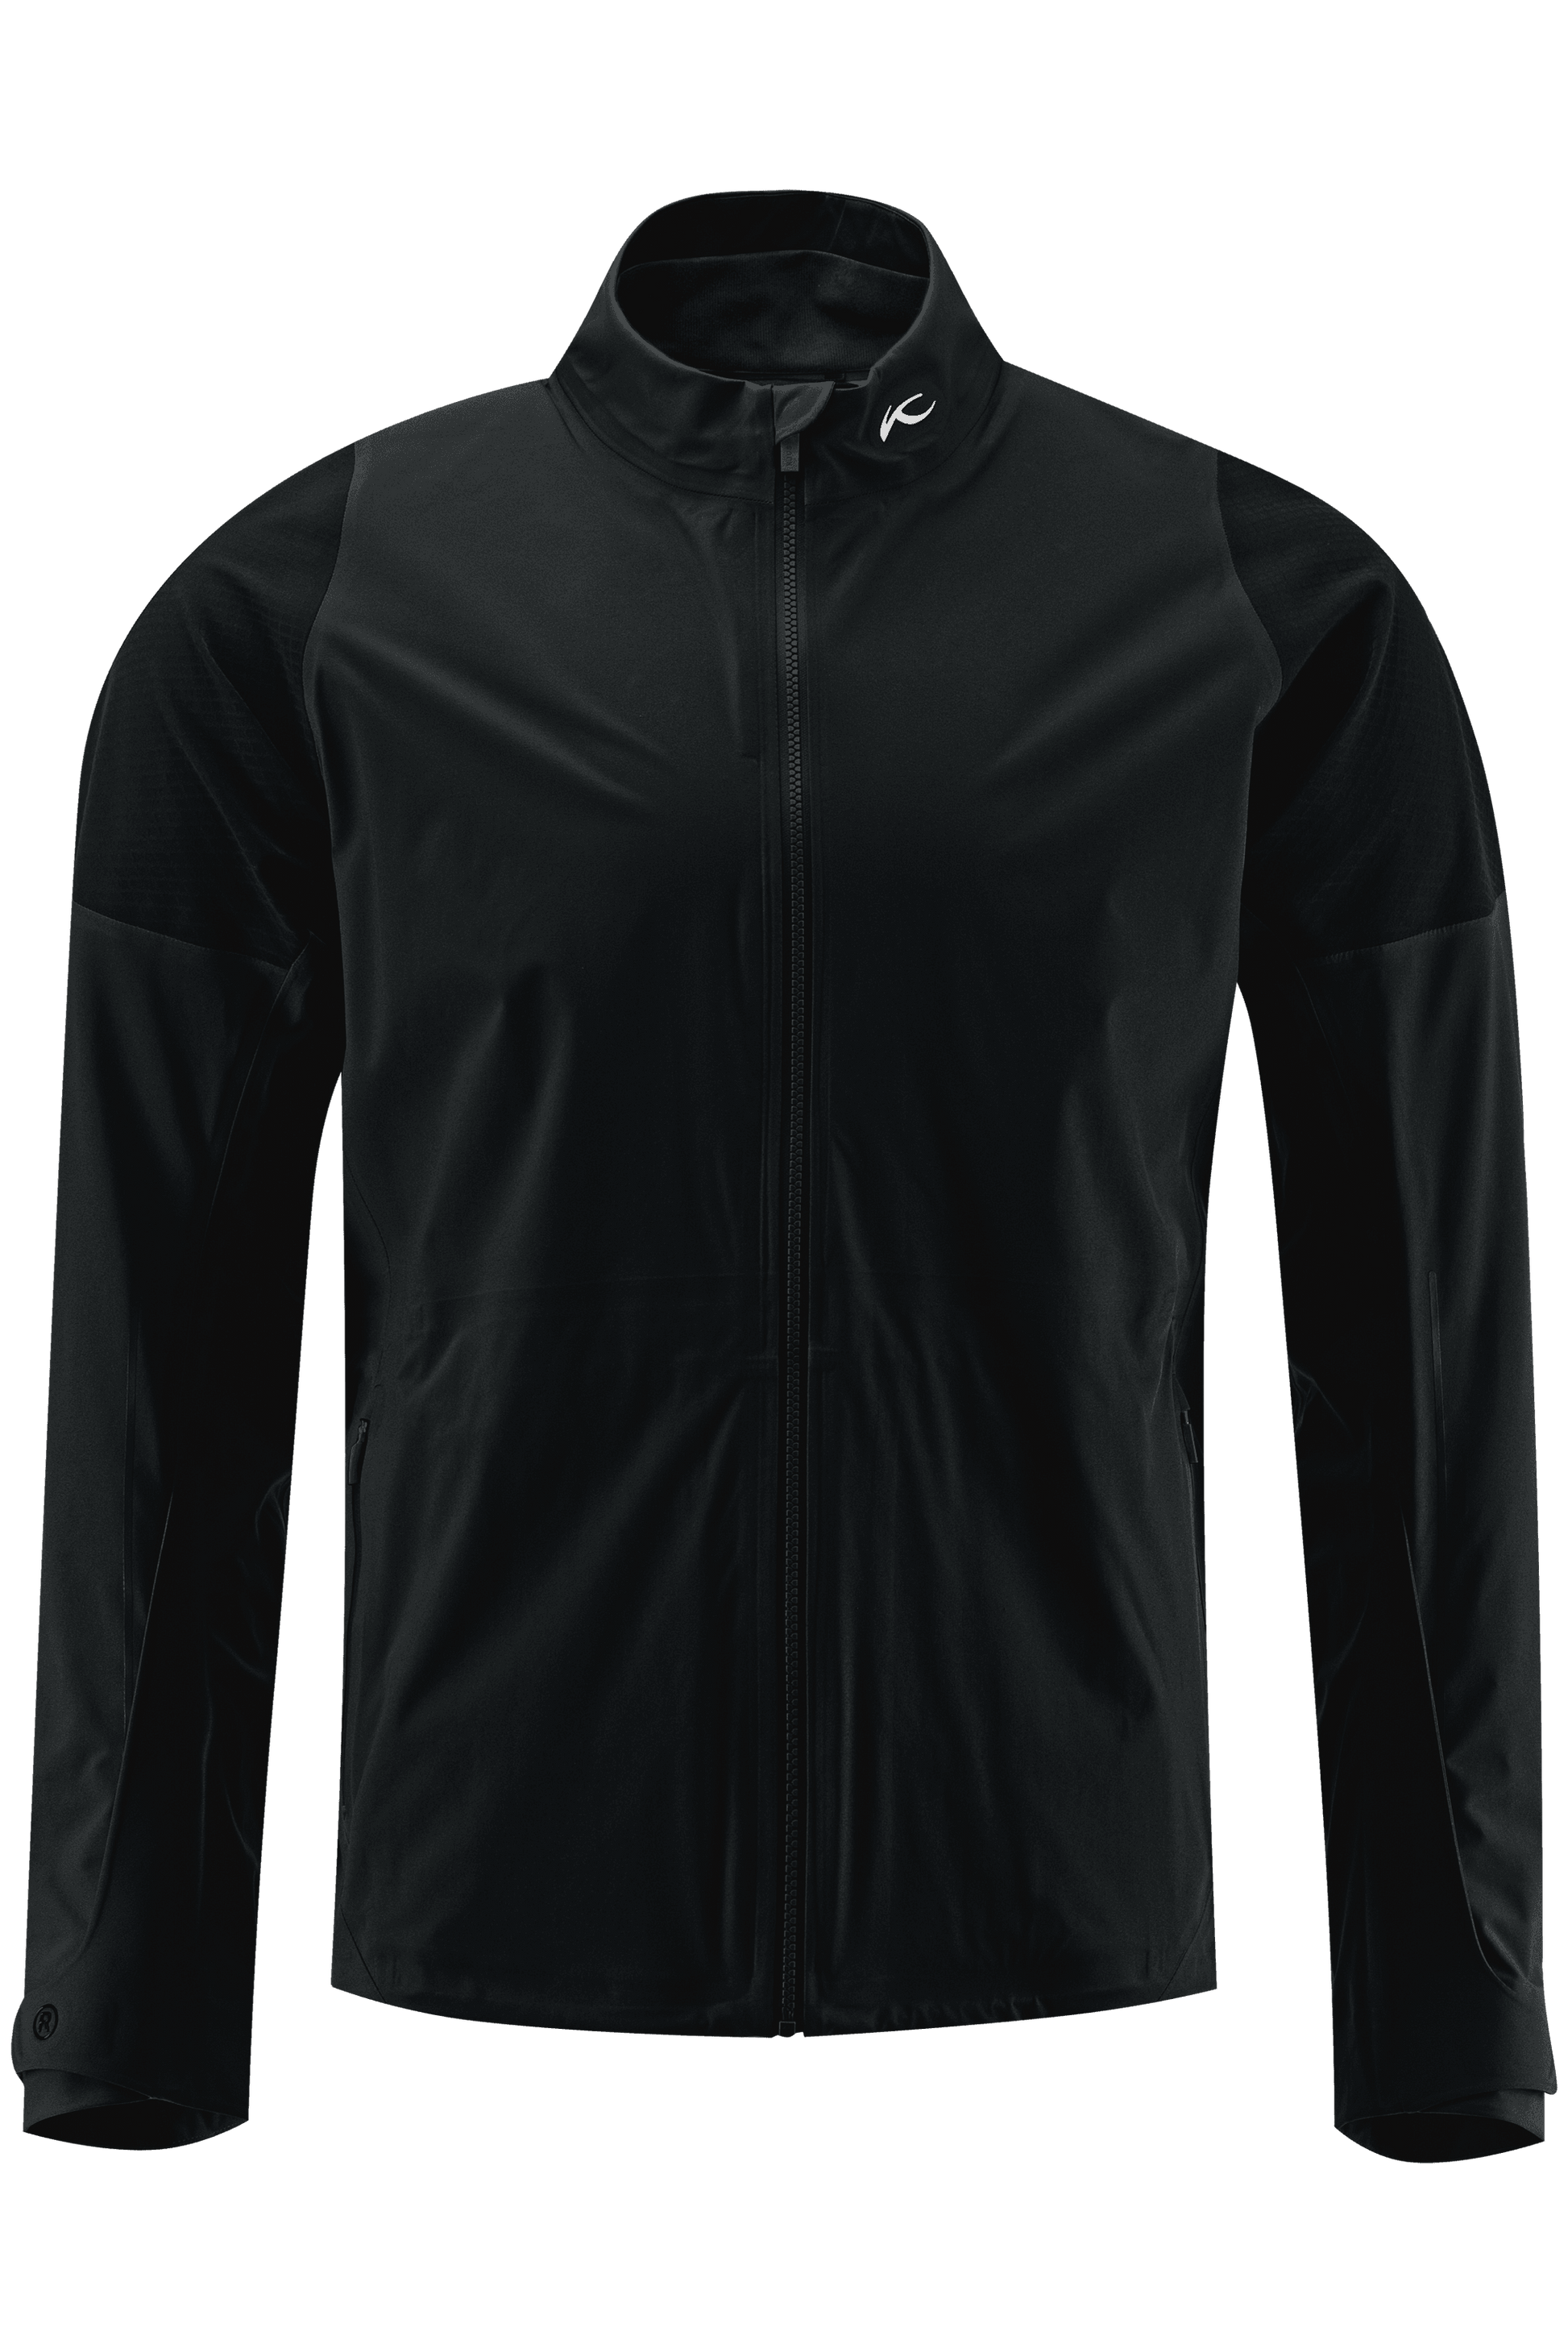 Men's Pro 3L 2.0 Jacket by Kjus - The Luxury Promotional Gifts Company Limited